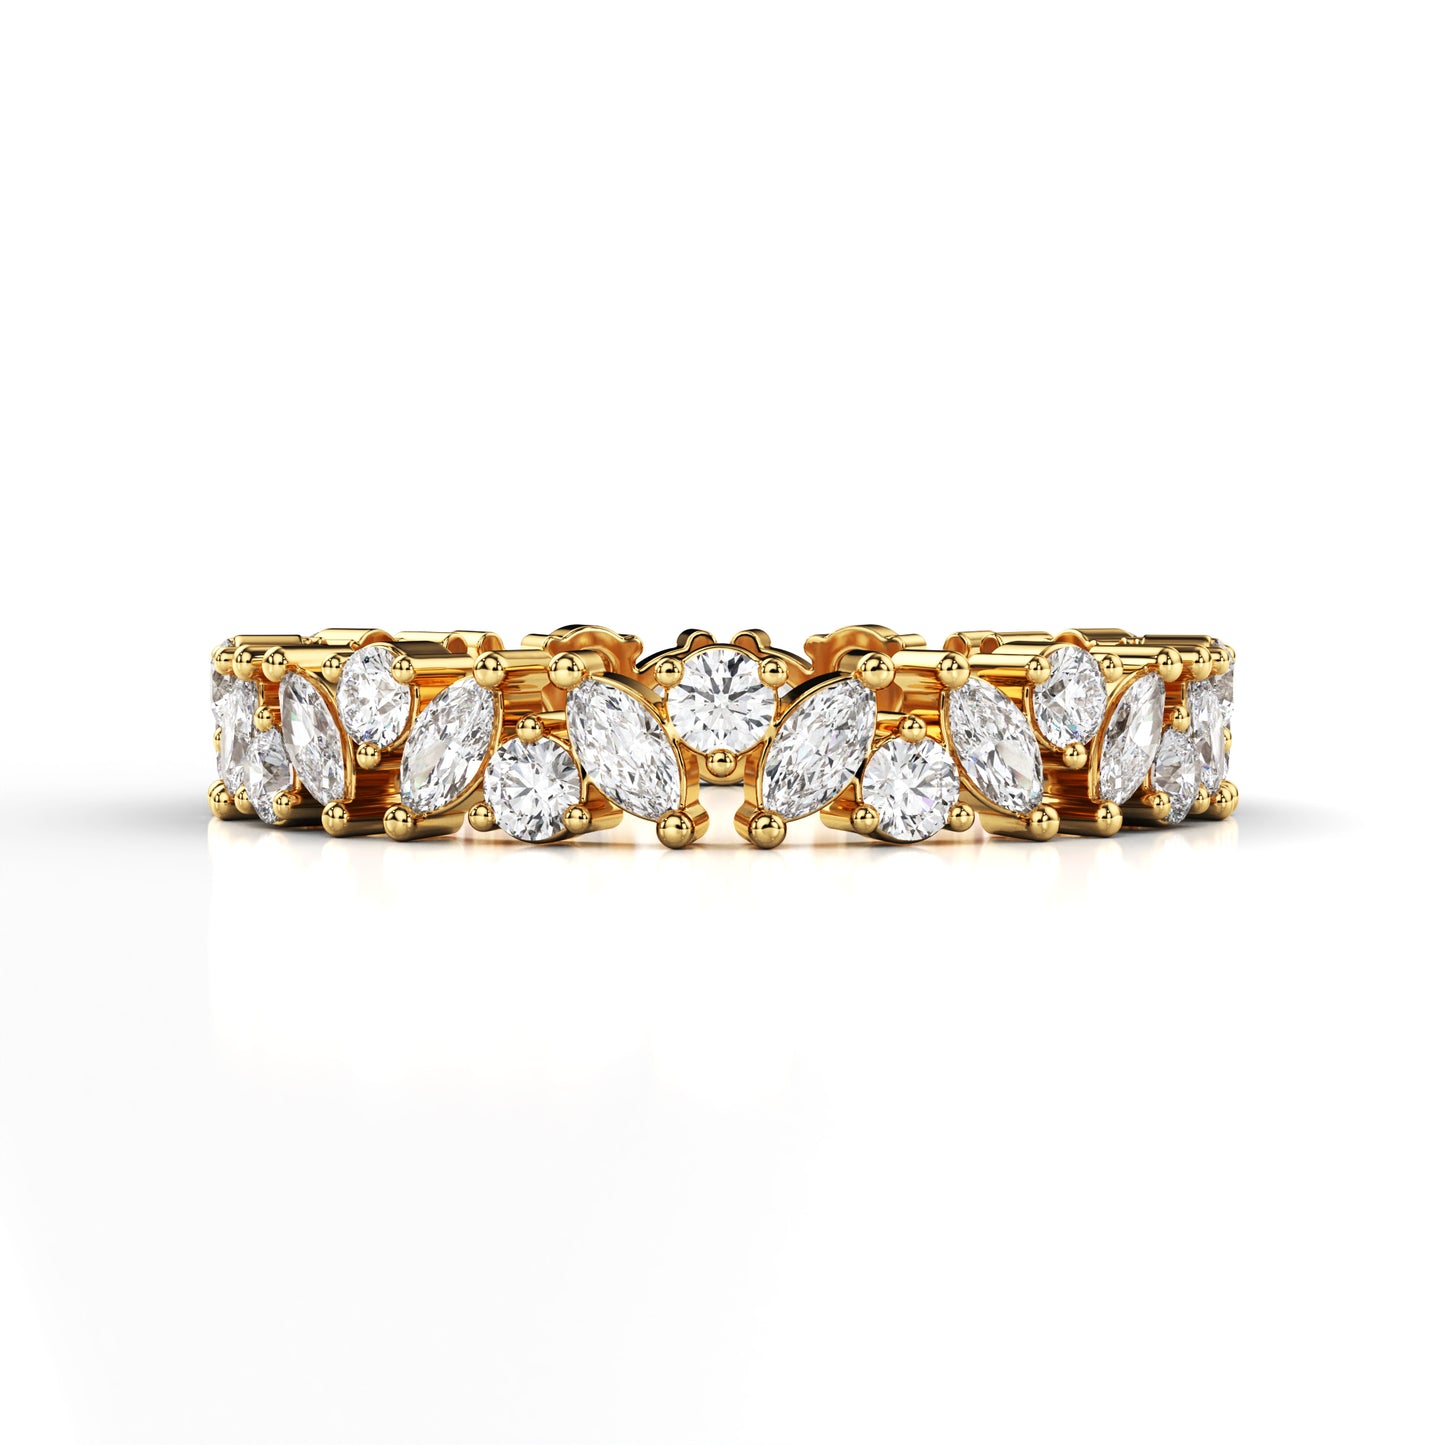 The Milly Eternity Band